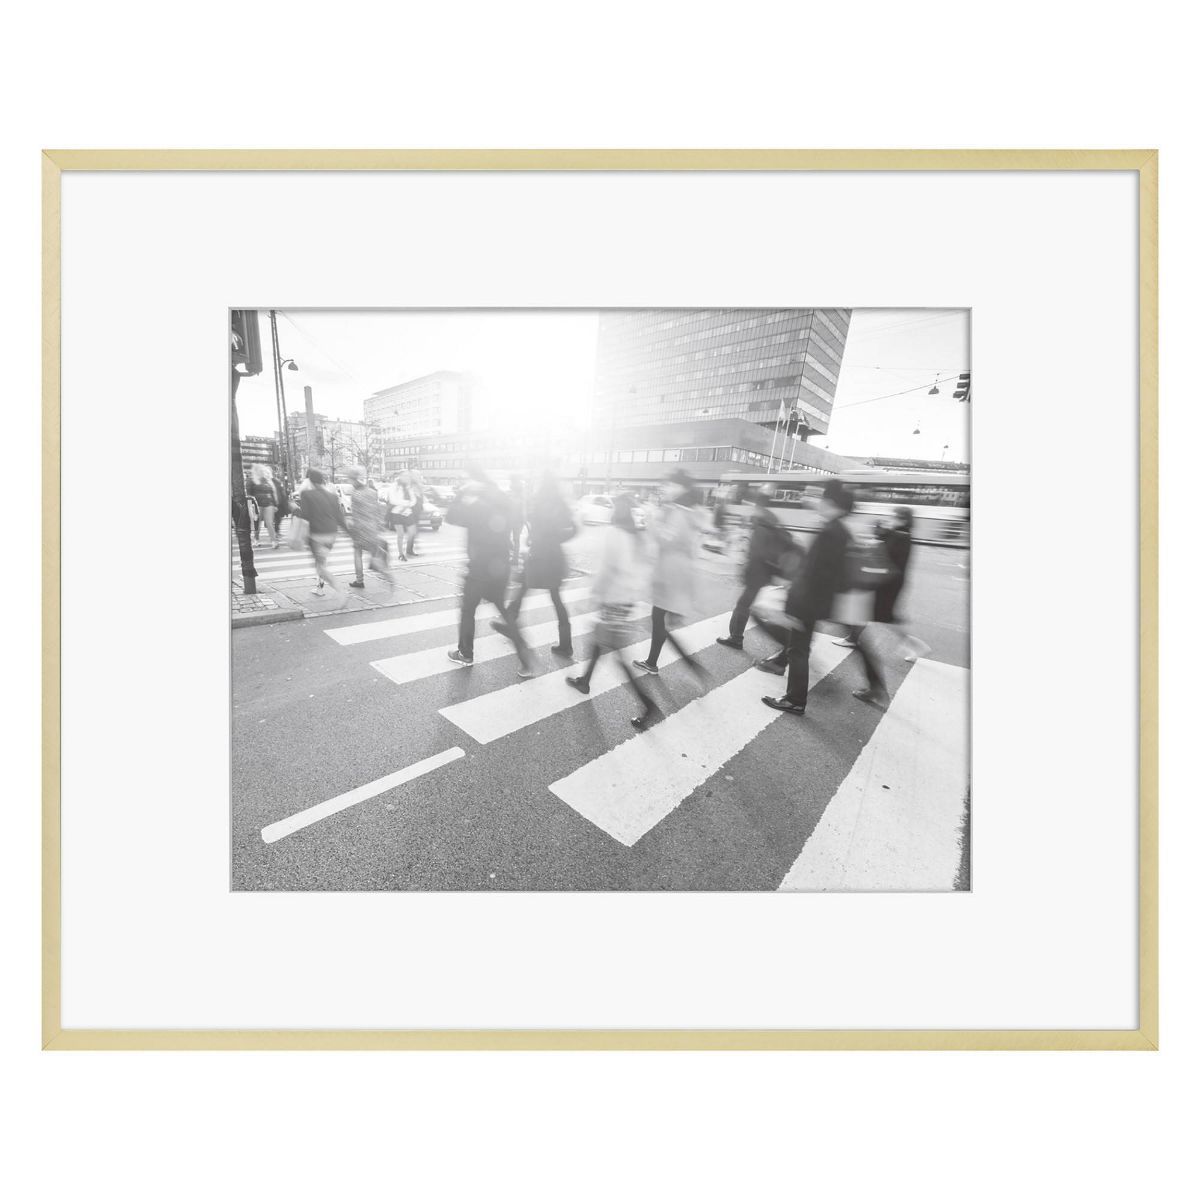 Thin Metal Matted Gallery Frame Gold - Threshold™ | Target